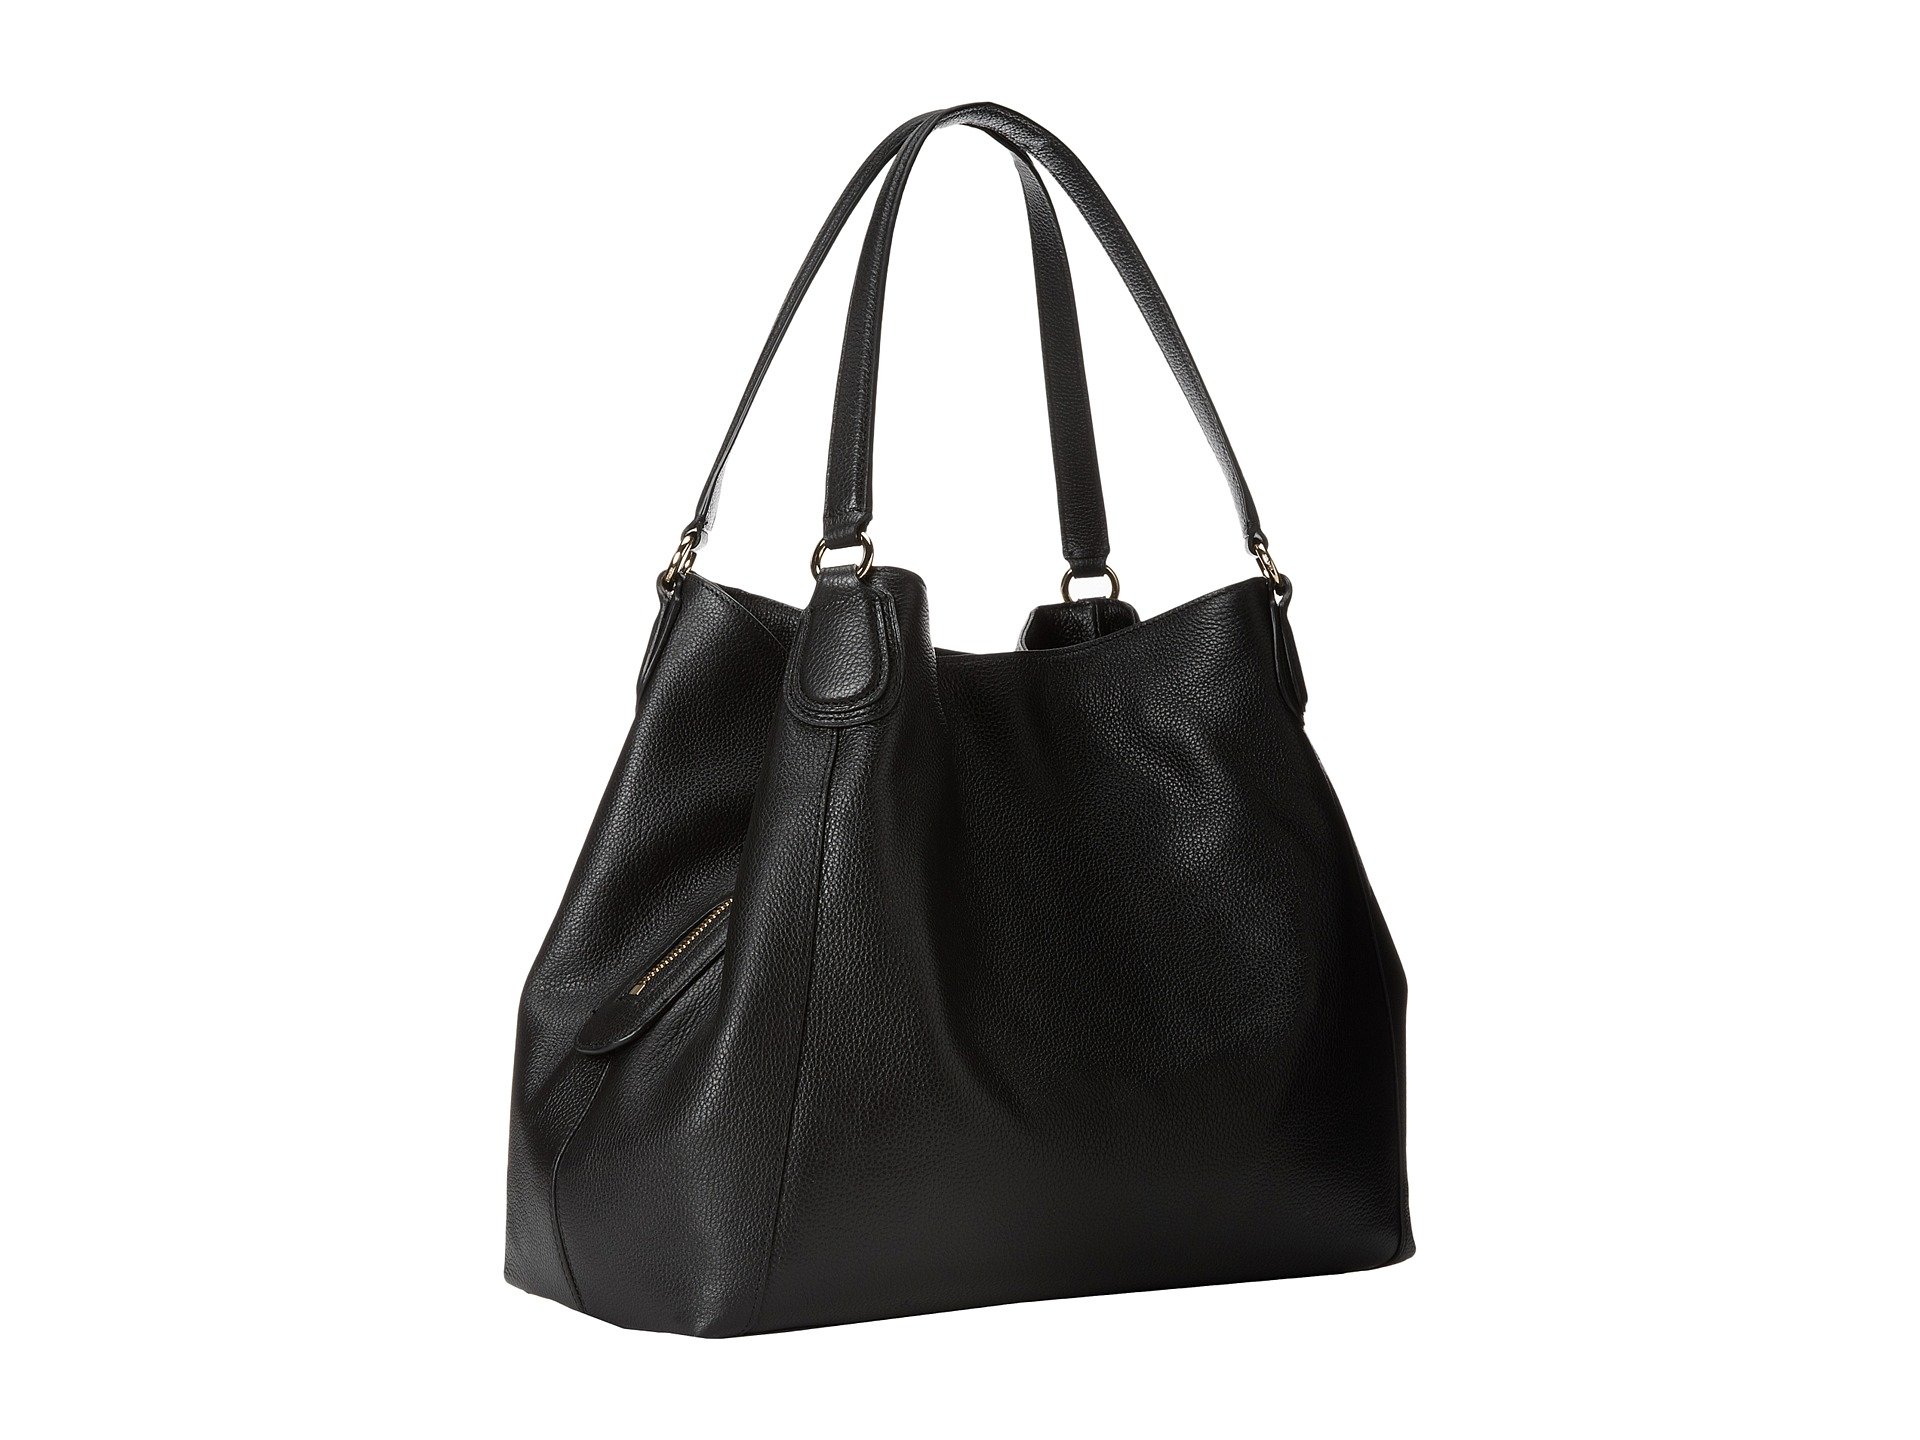 Lyst - Coach Refined Pebbled Leather Edie Shoulder Bag in Black